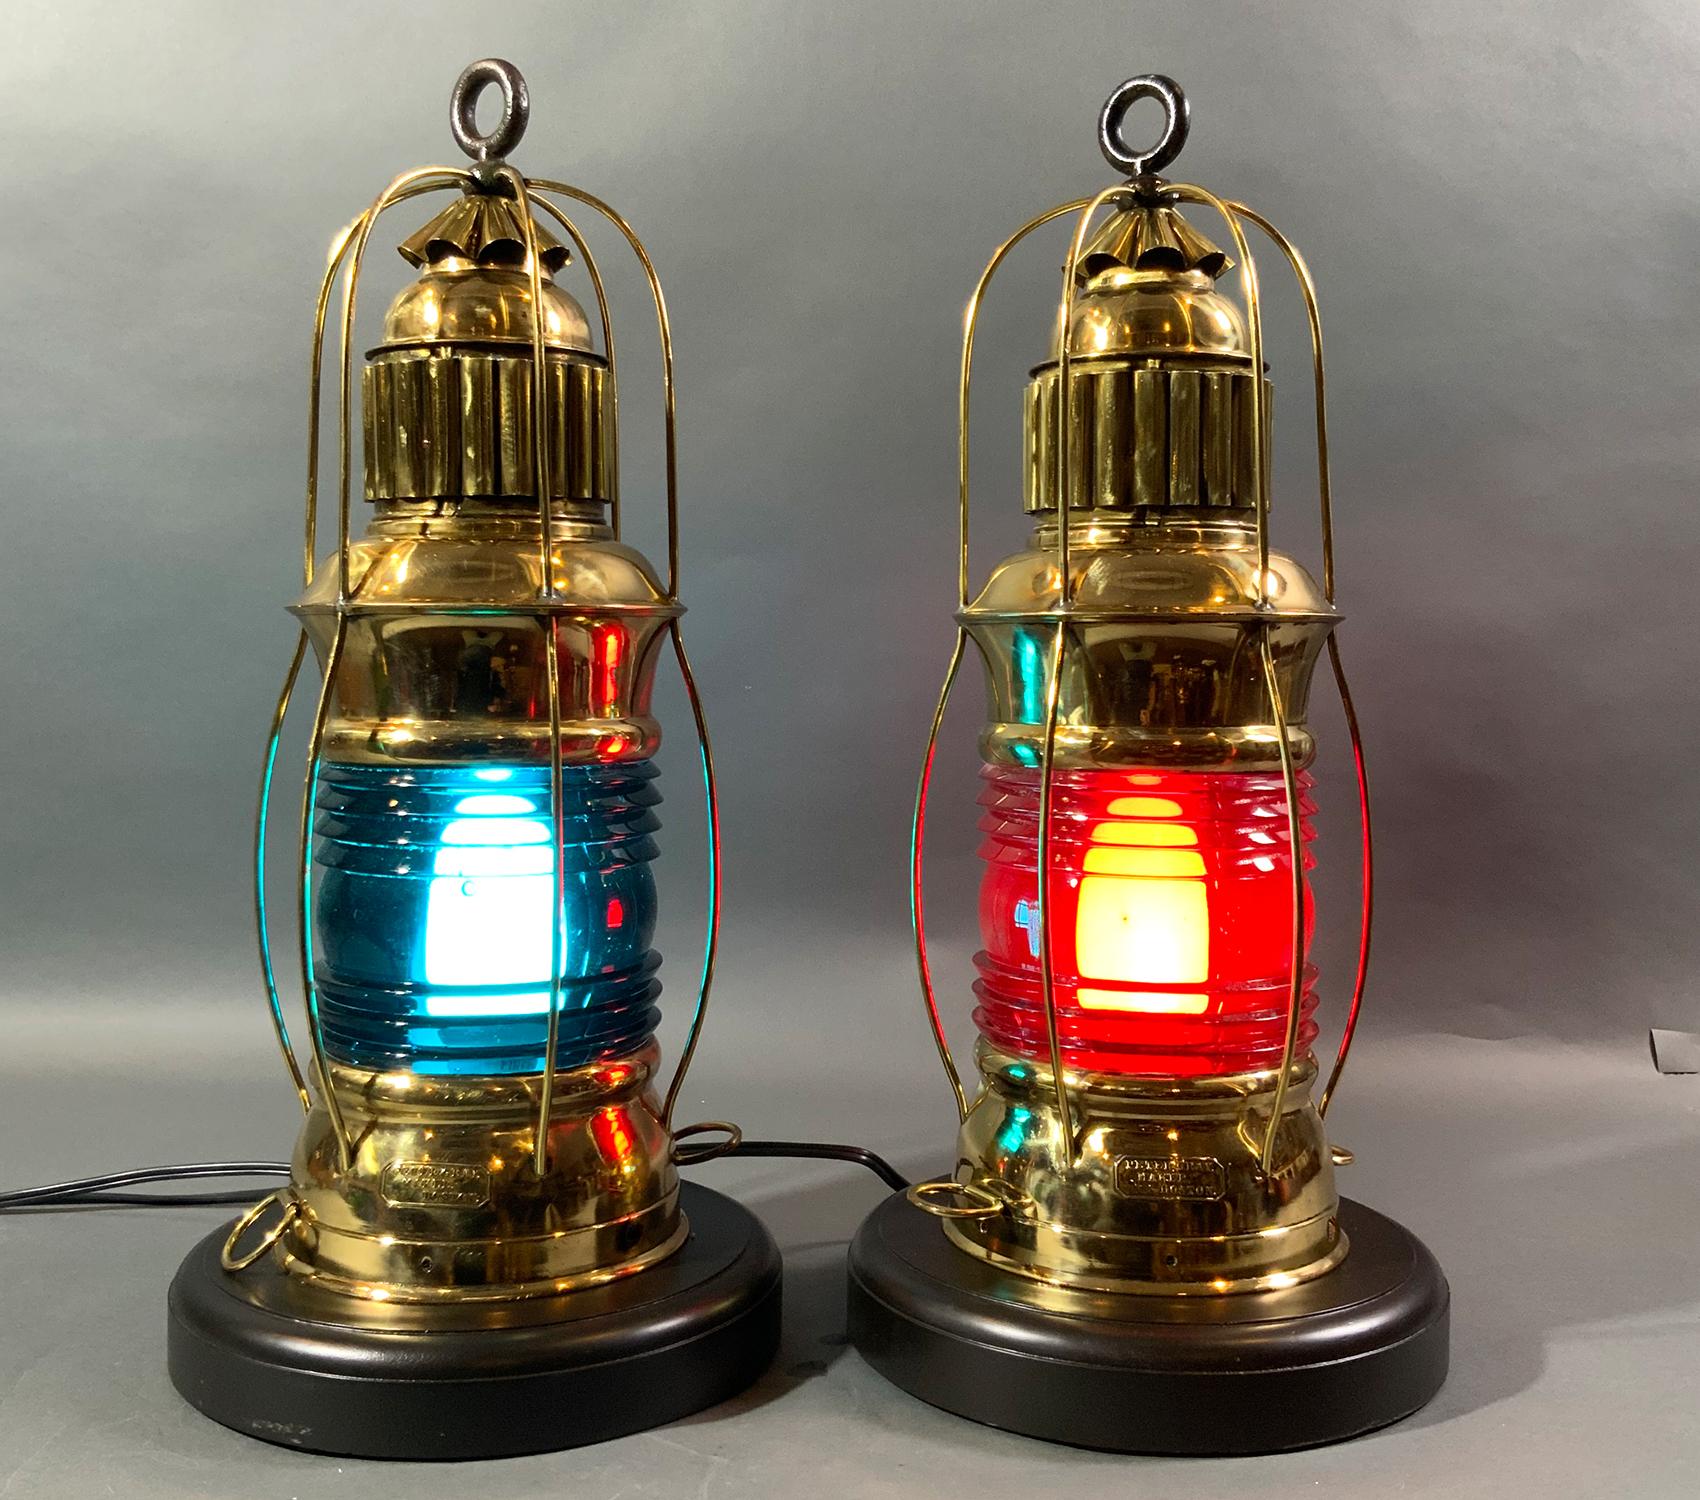 Very fine and rare pair of polished and lacquered ships lanterns with makers badges from Peter Gray of Boston. This is a great pair with rich red and blue Fresnel glass lenses set into brass cases with protective bars, vented tops and hoisting